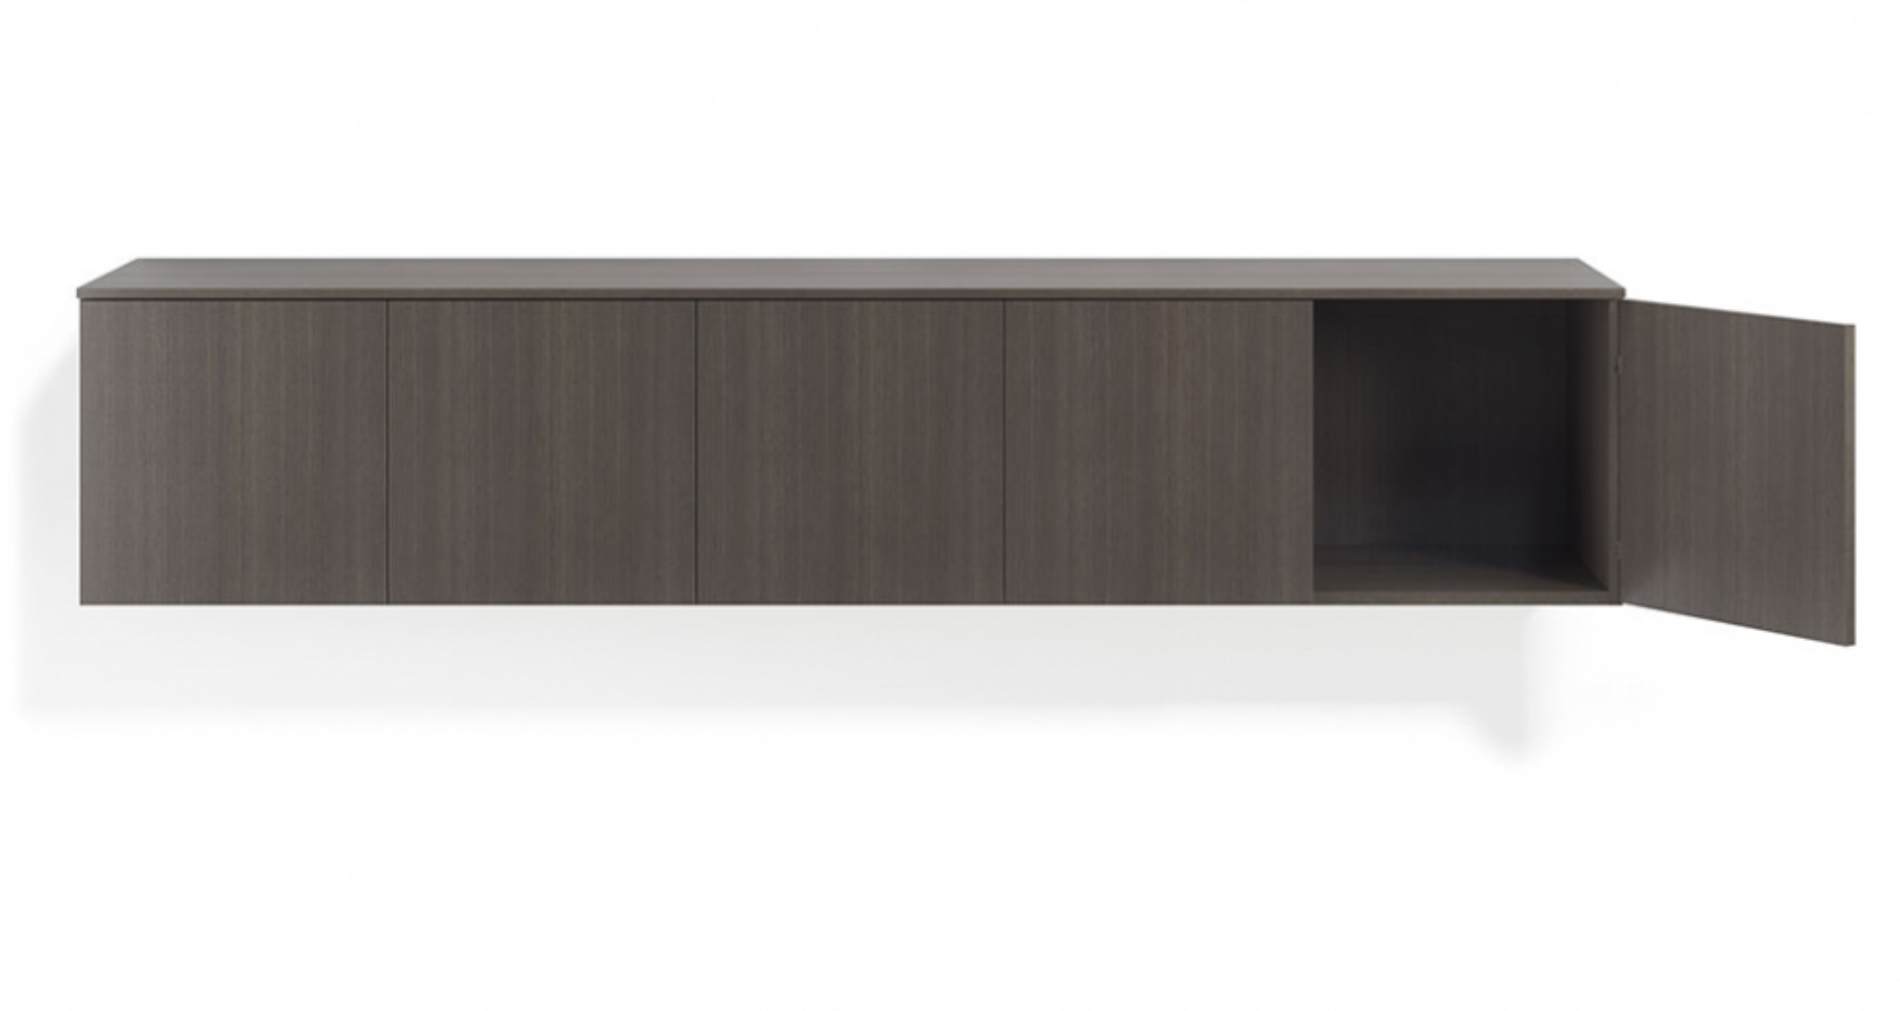 New Modern Wood Credenza - Ambience Doré